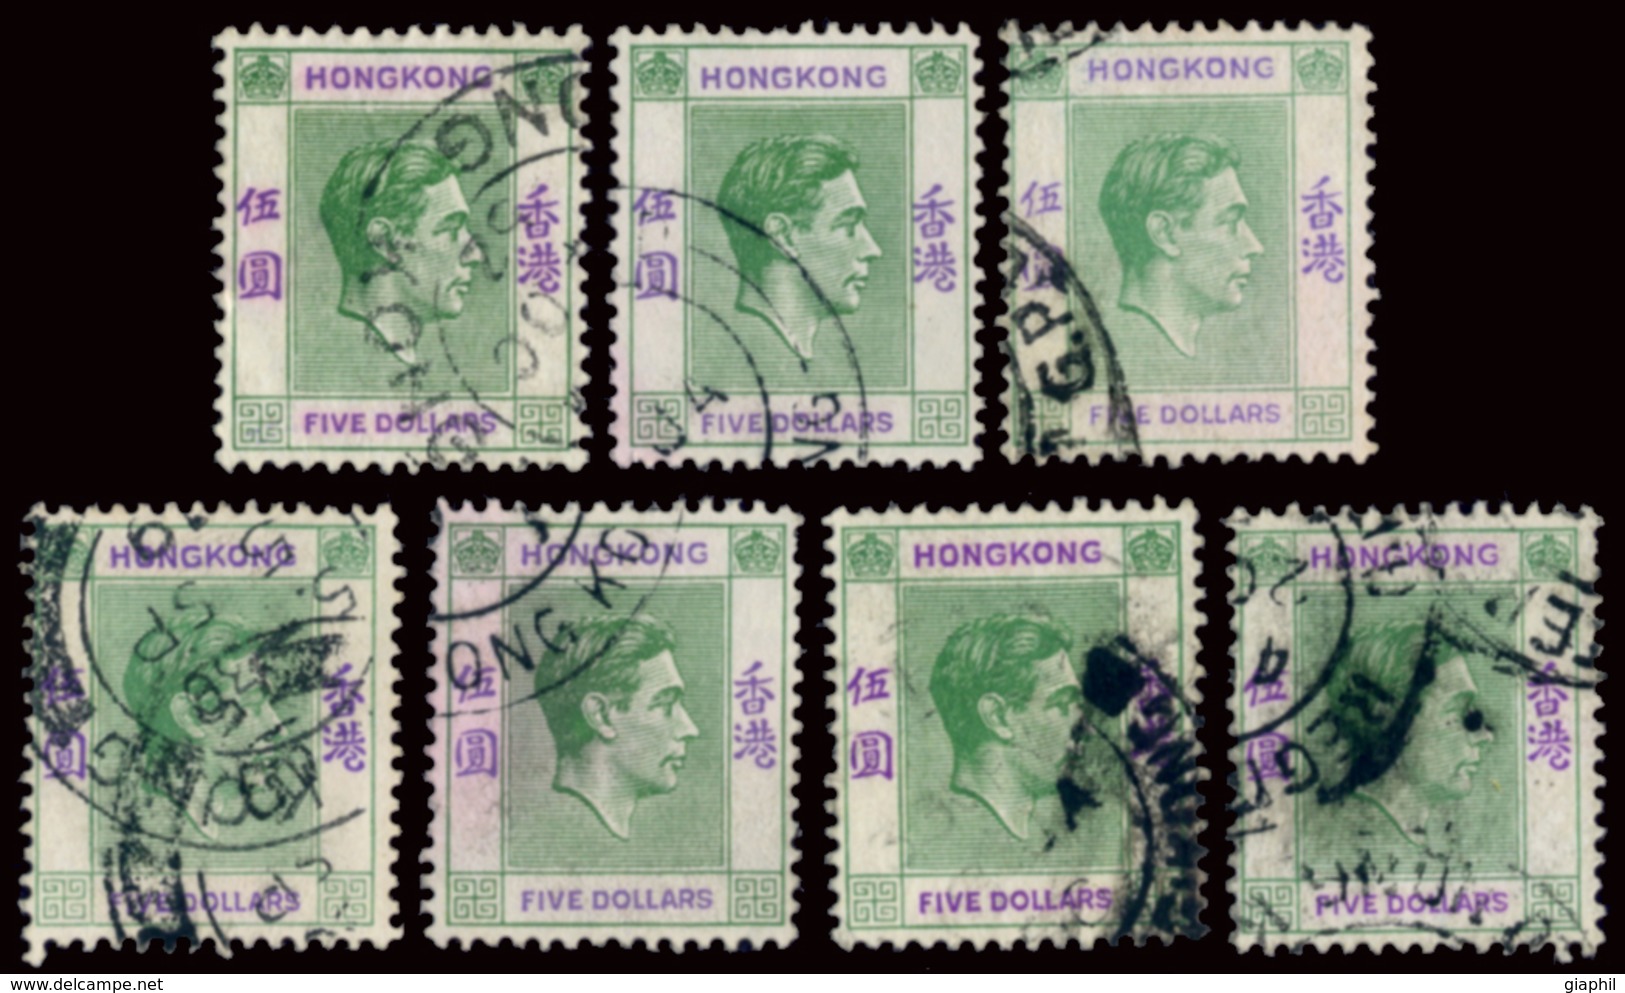 HONG KONG 1938-52 5 $ 7 EXAMPLES (SG 160) USED OFFER! - Usati